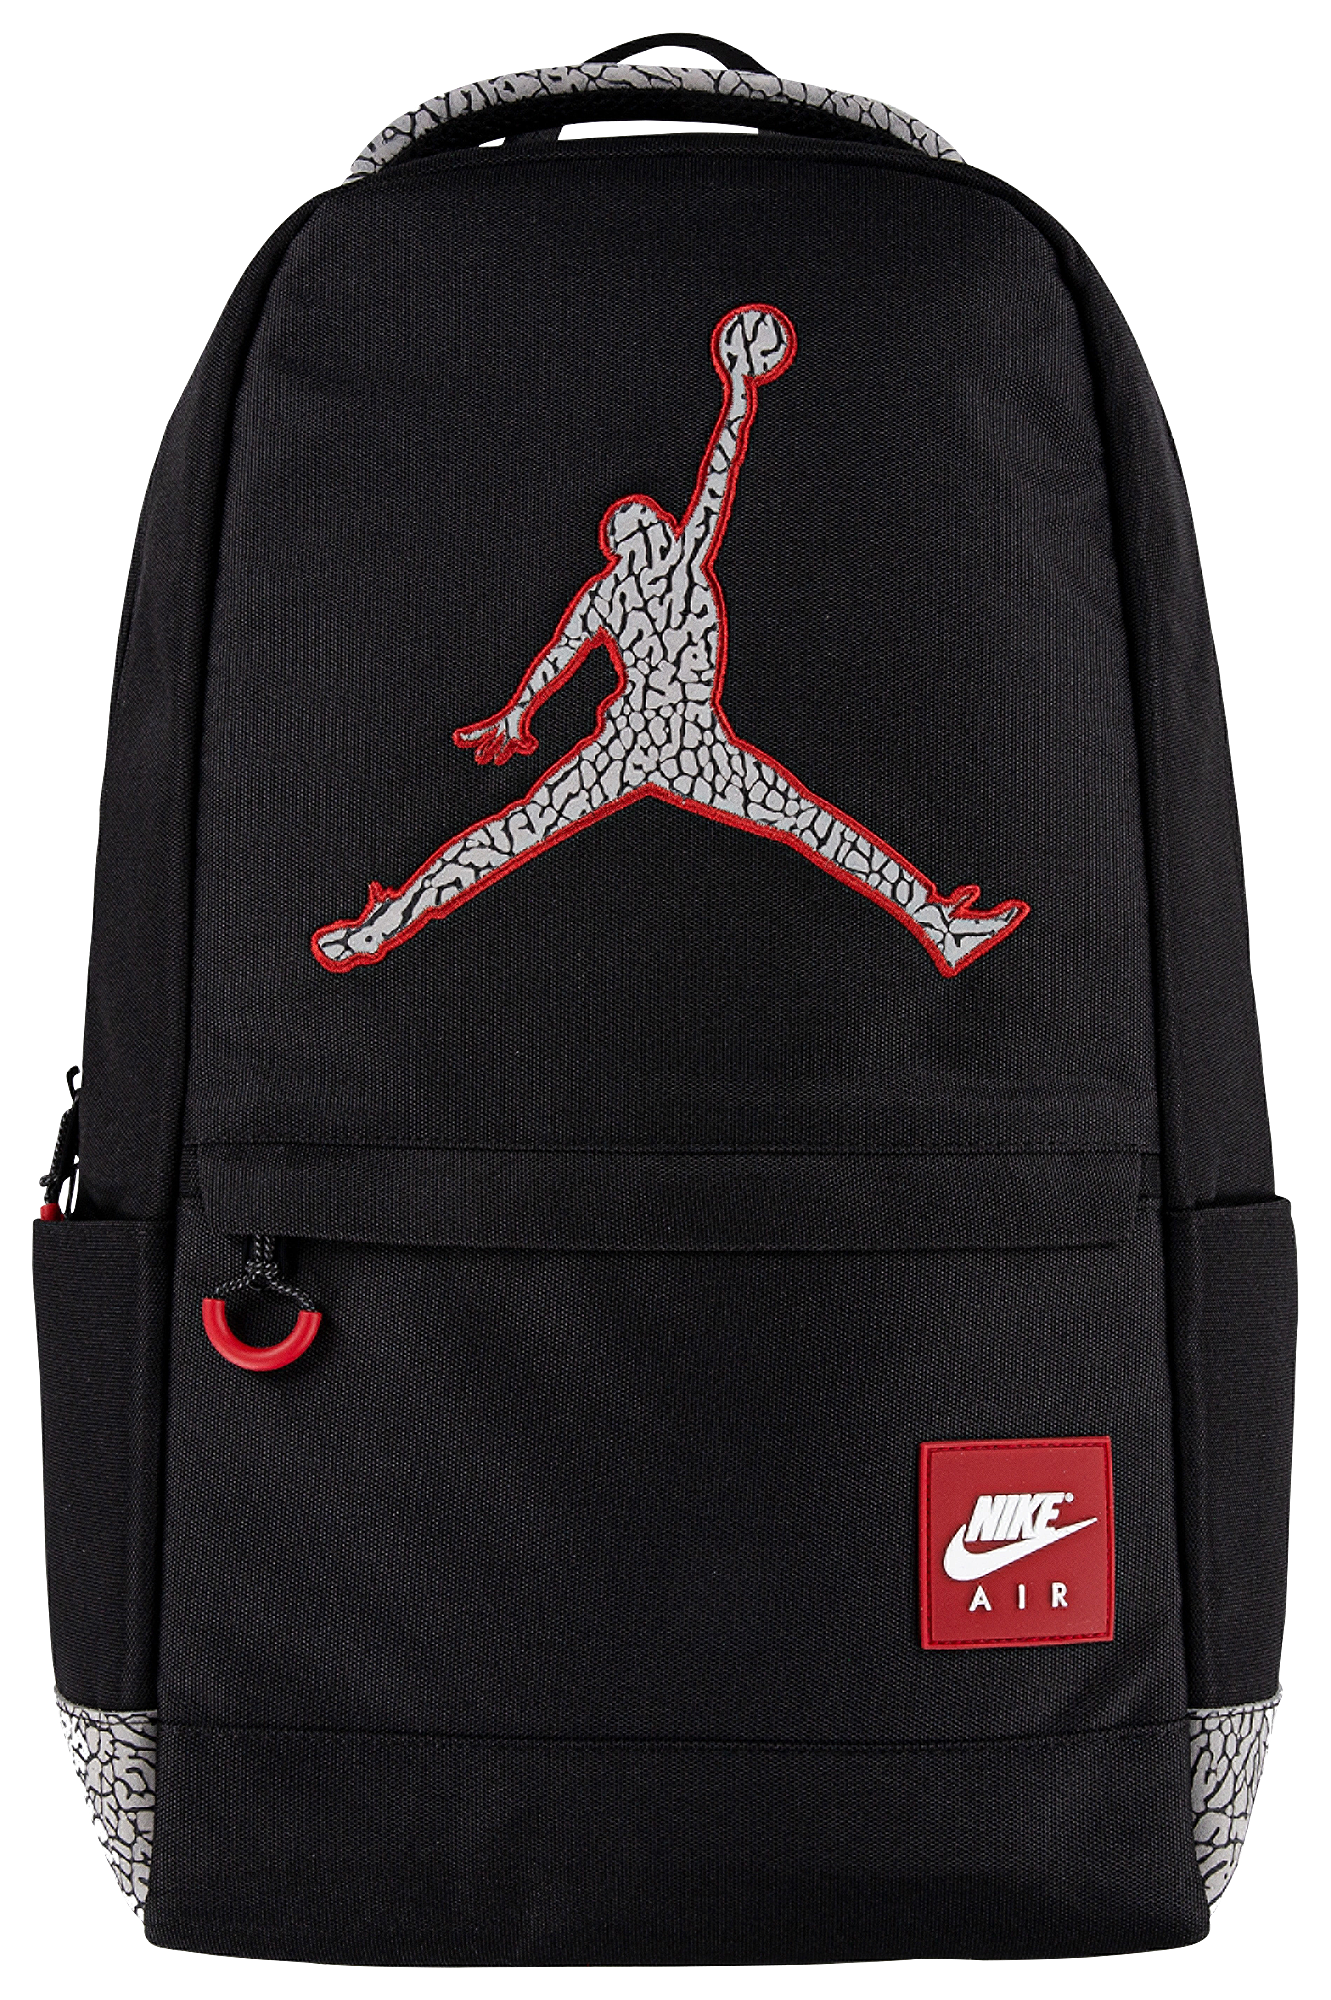 champs clear backpack